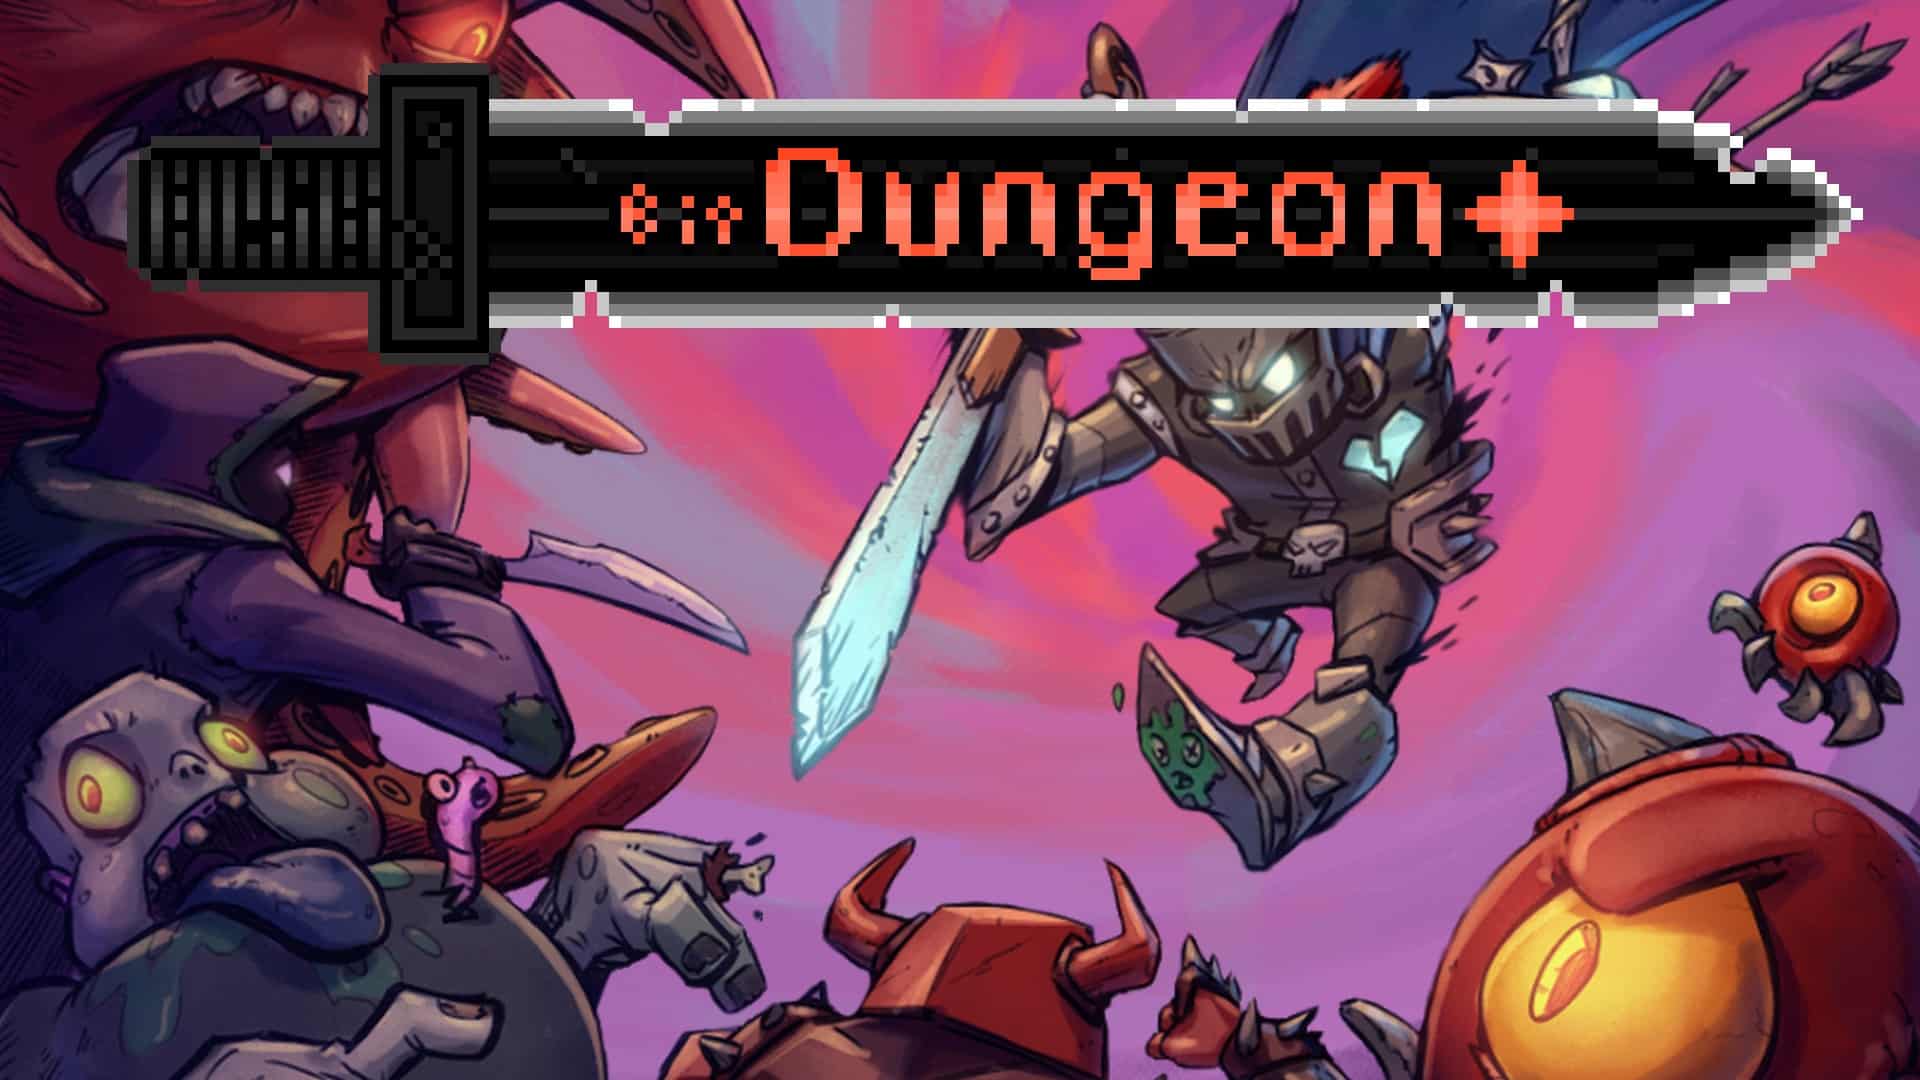 Bit Dungeon Plus player count stats